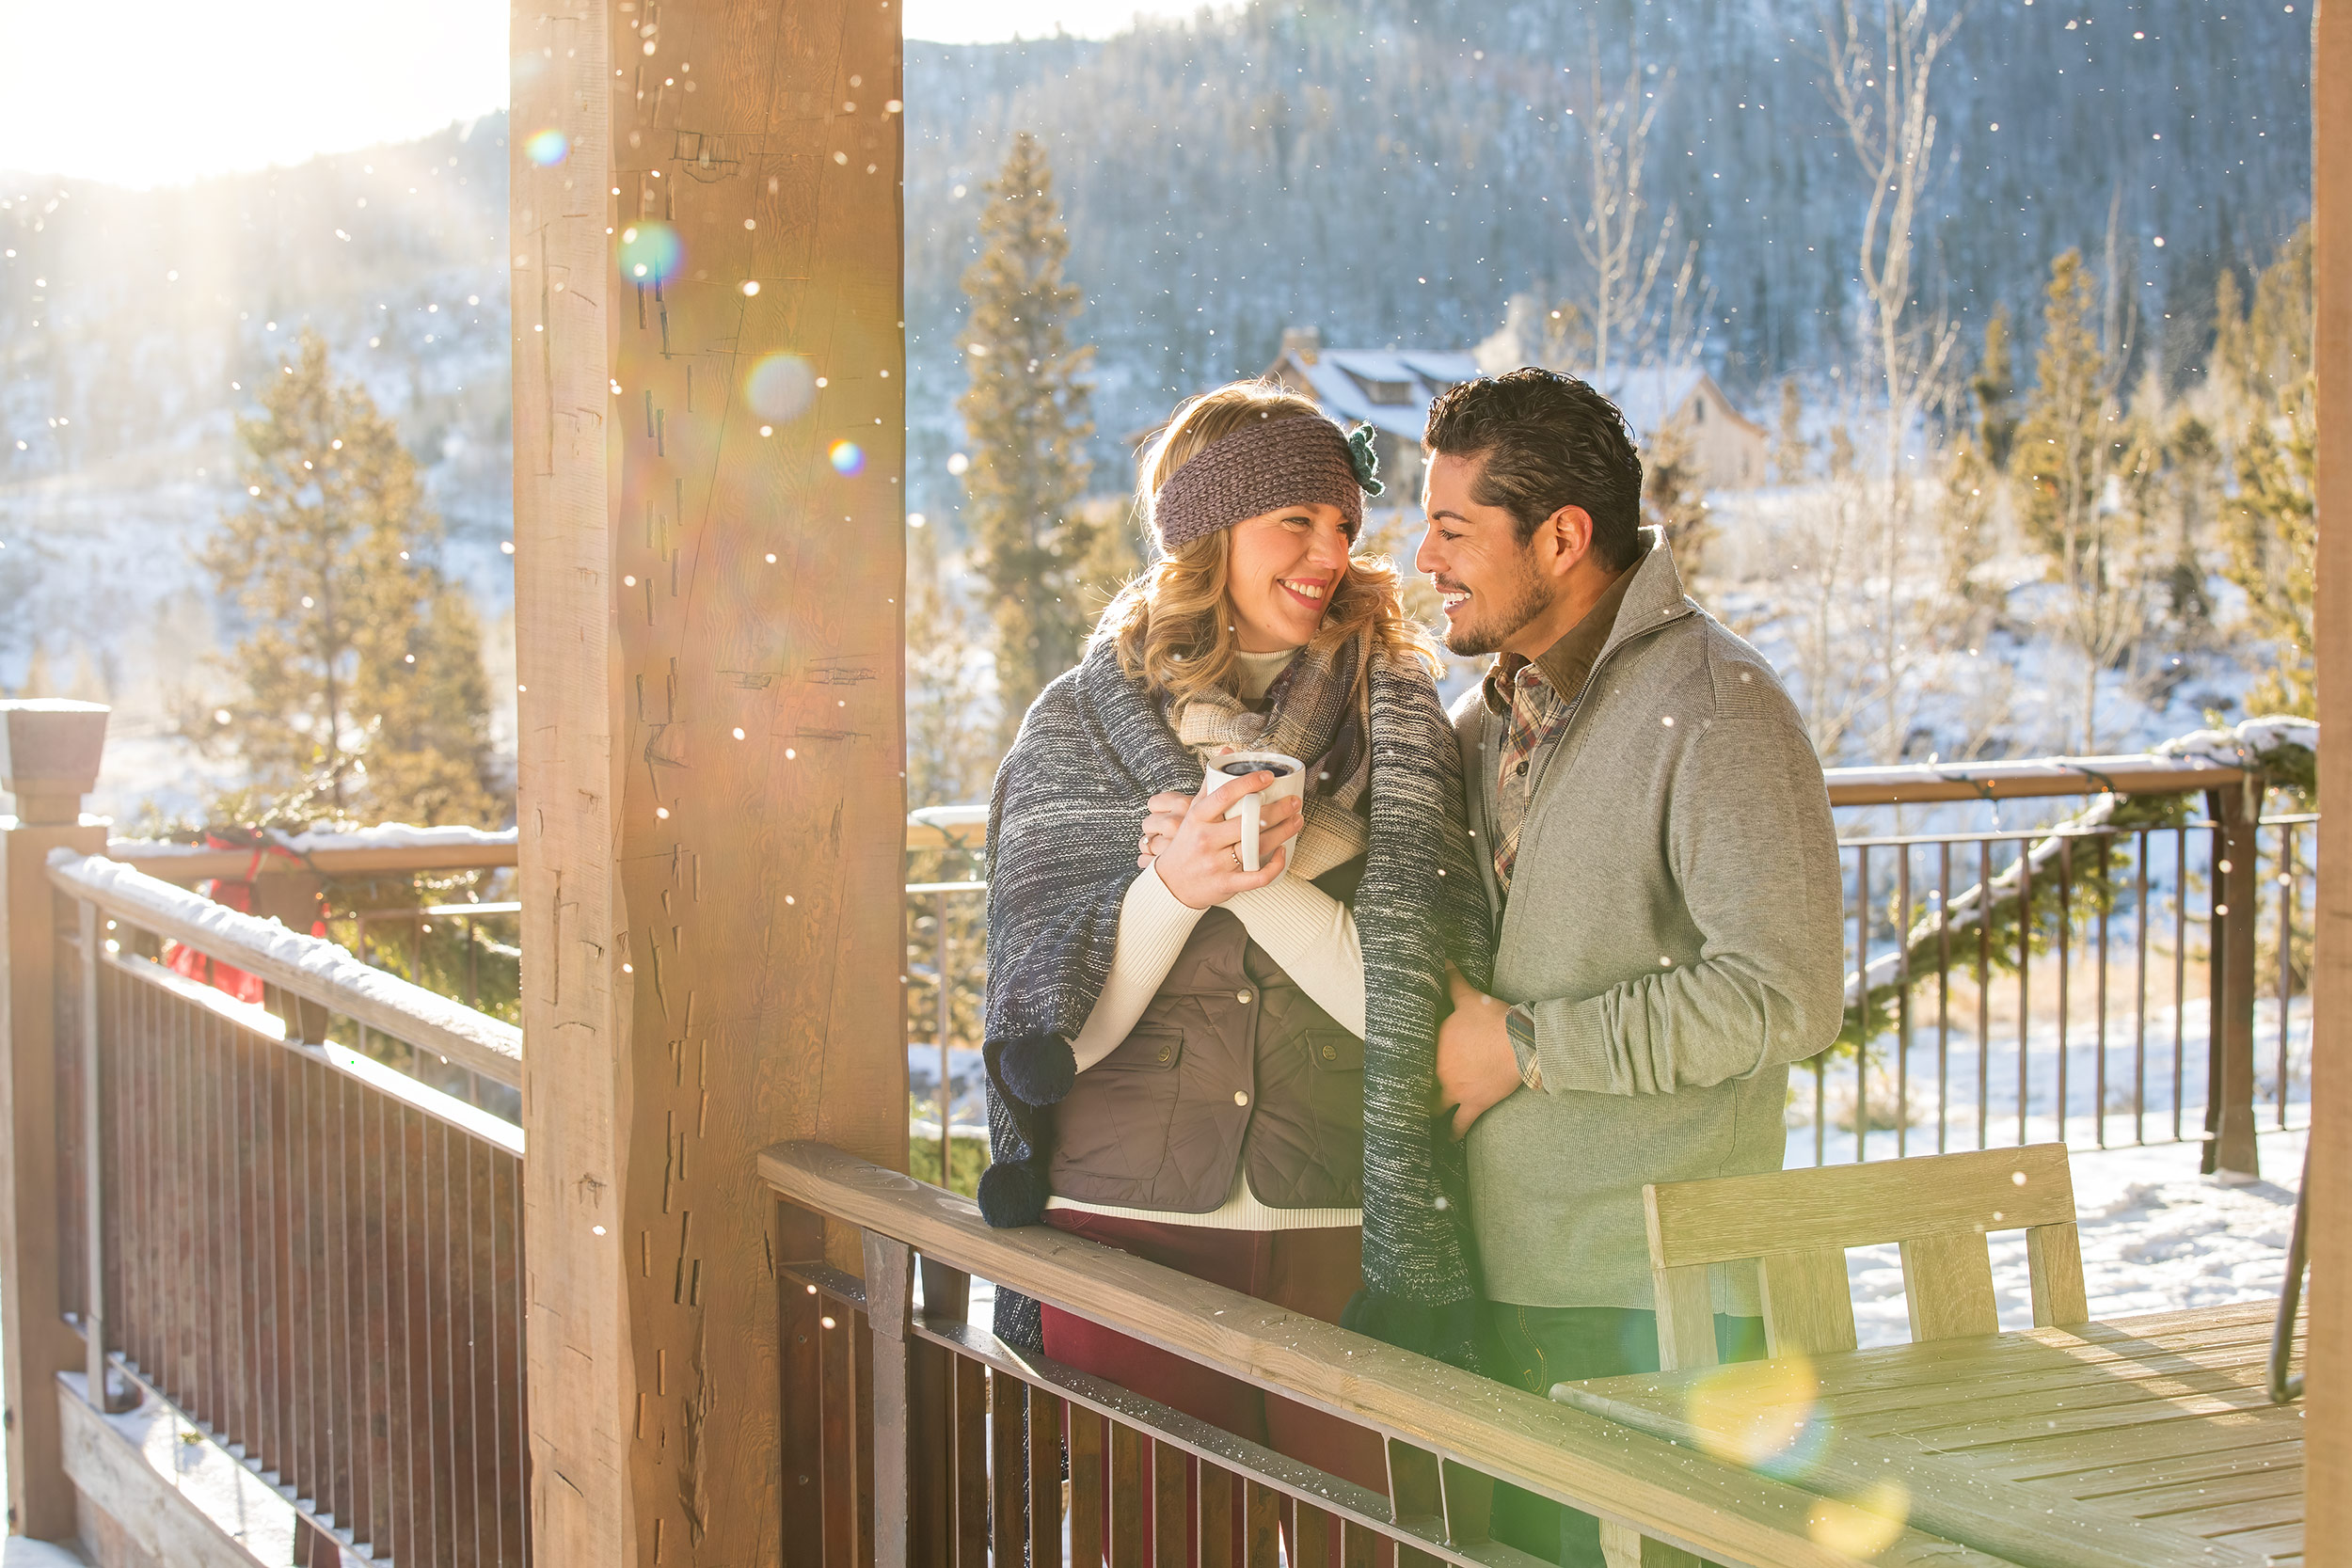 Lifestyle photography, couple drinking coffee outside on a porch in snow